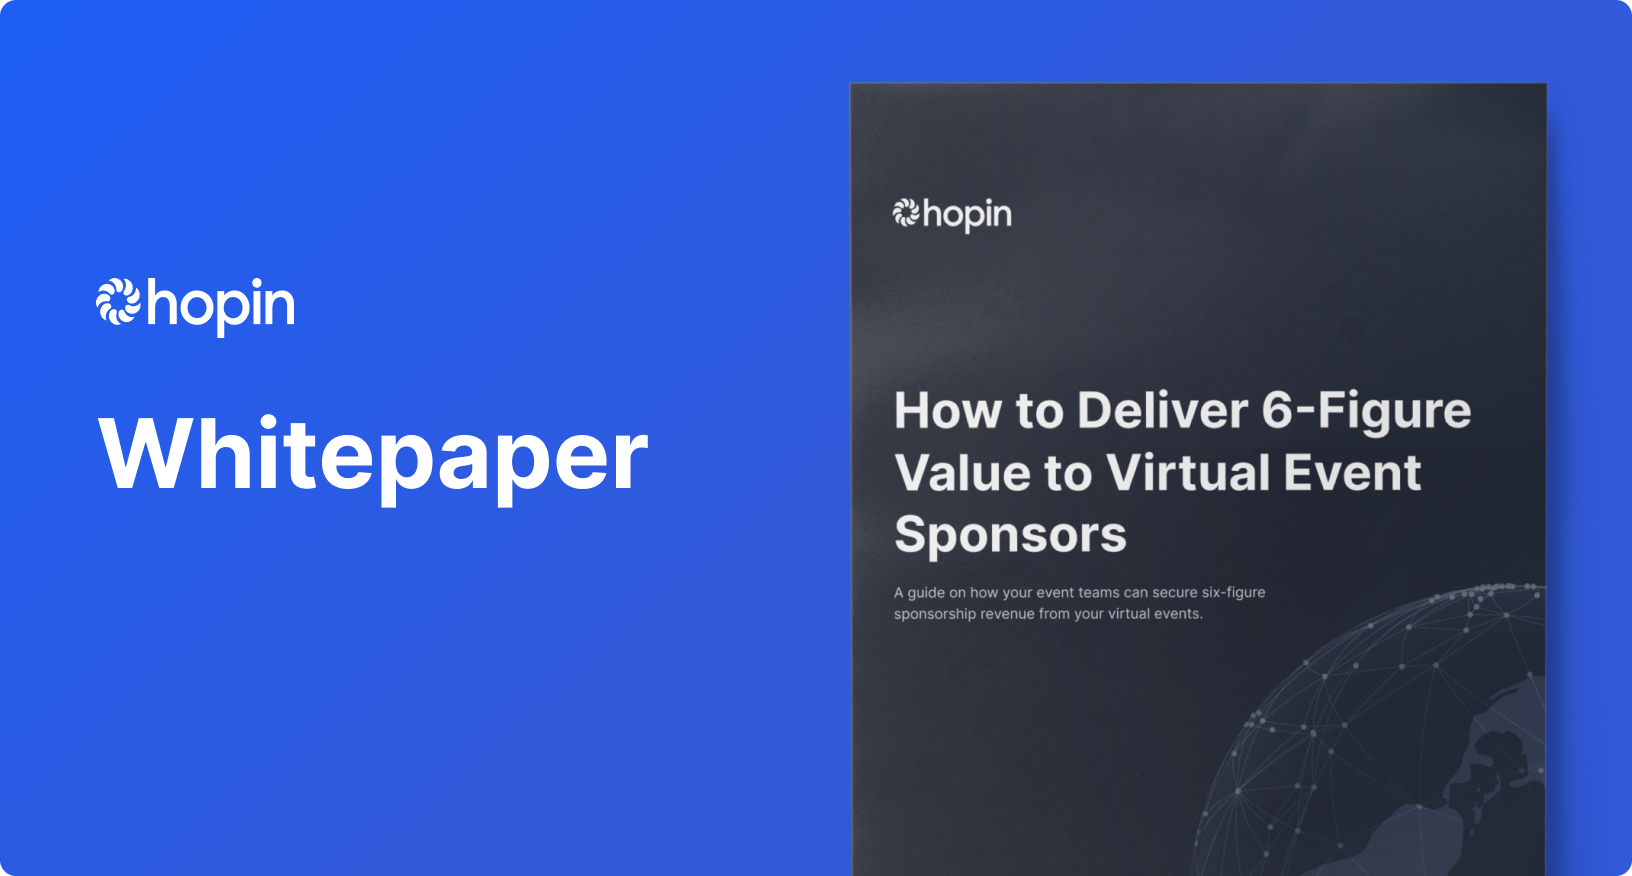 Hopin Sponsor Whitepaper: How to Deliver 6-Figure Value to Virtual Event Sponsors